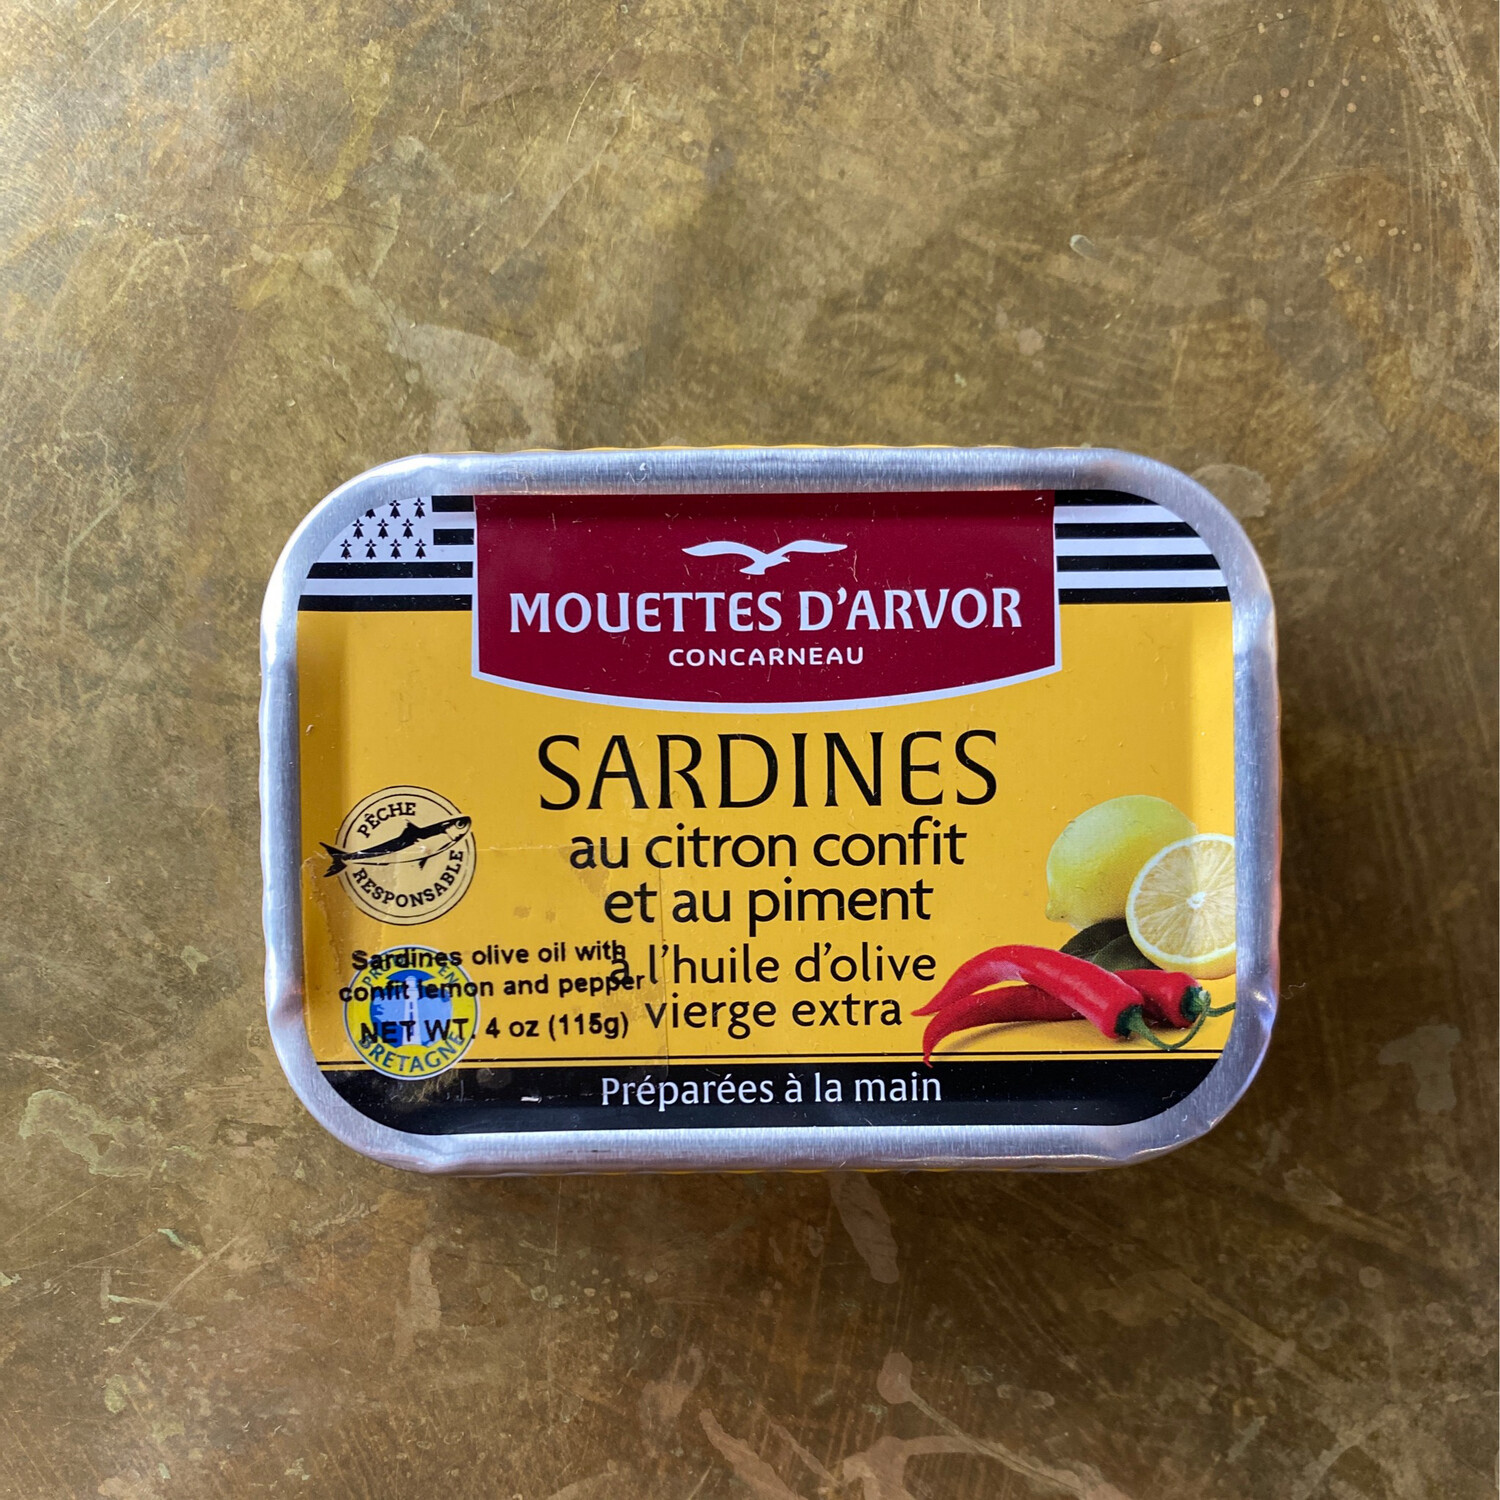 Mouettes d'Arvor Sardines in EVOO with Lemon Confit & Chili Pepper